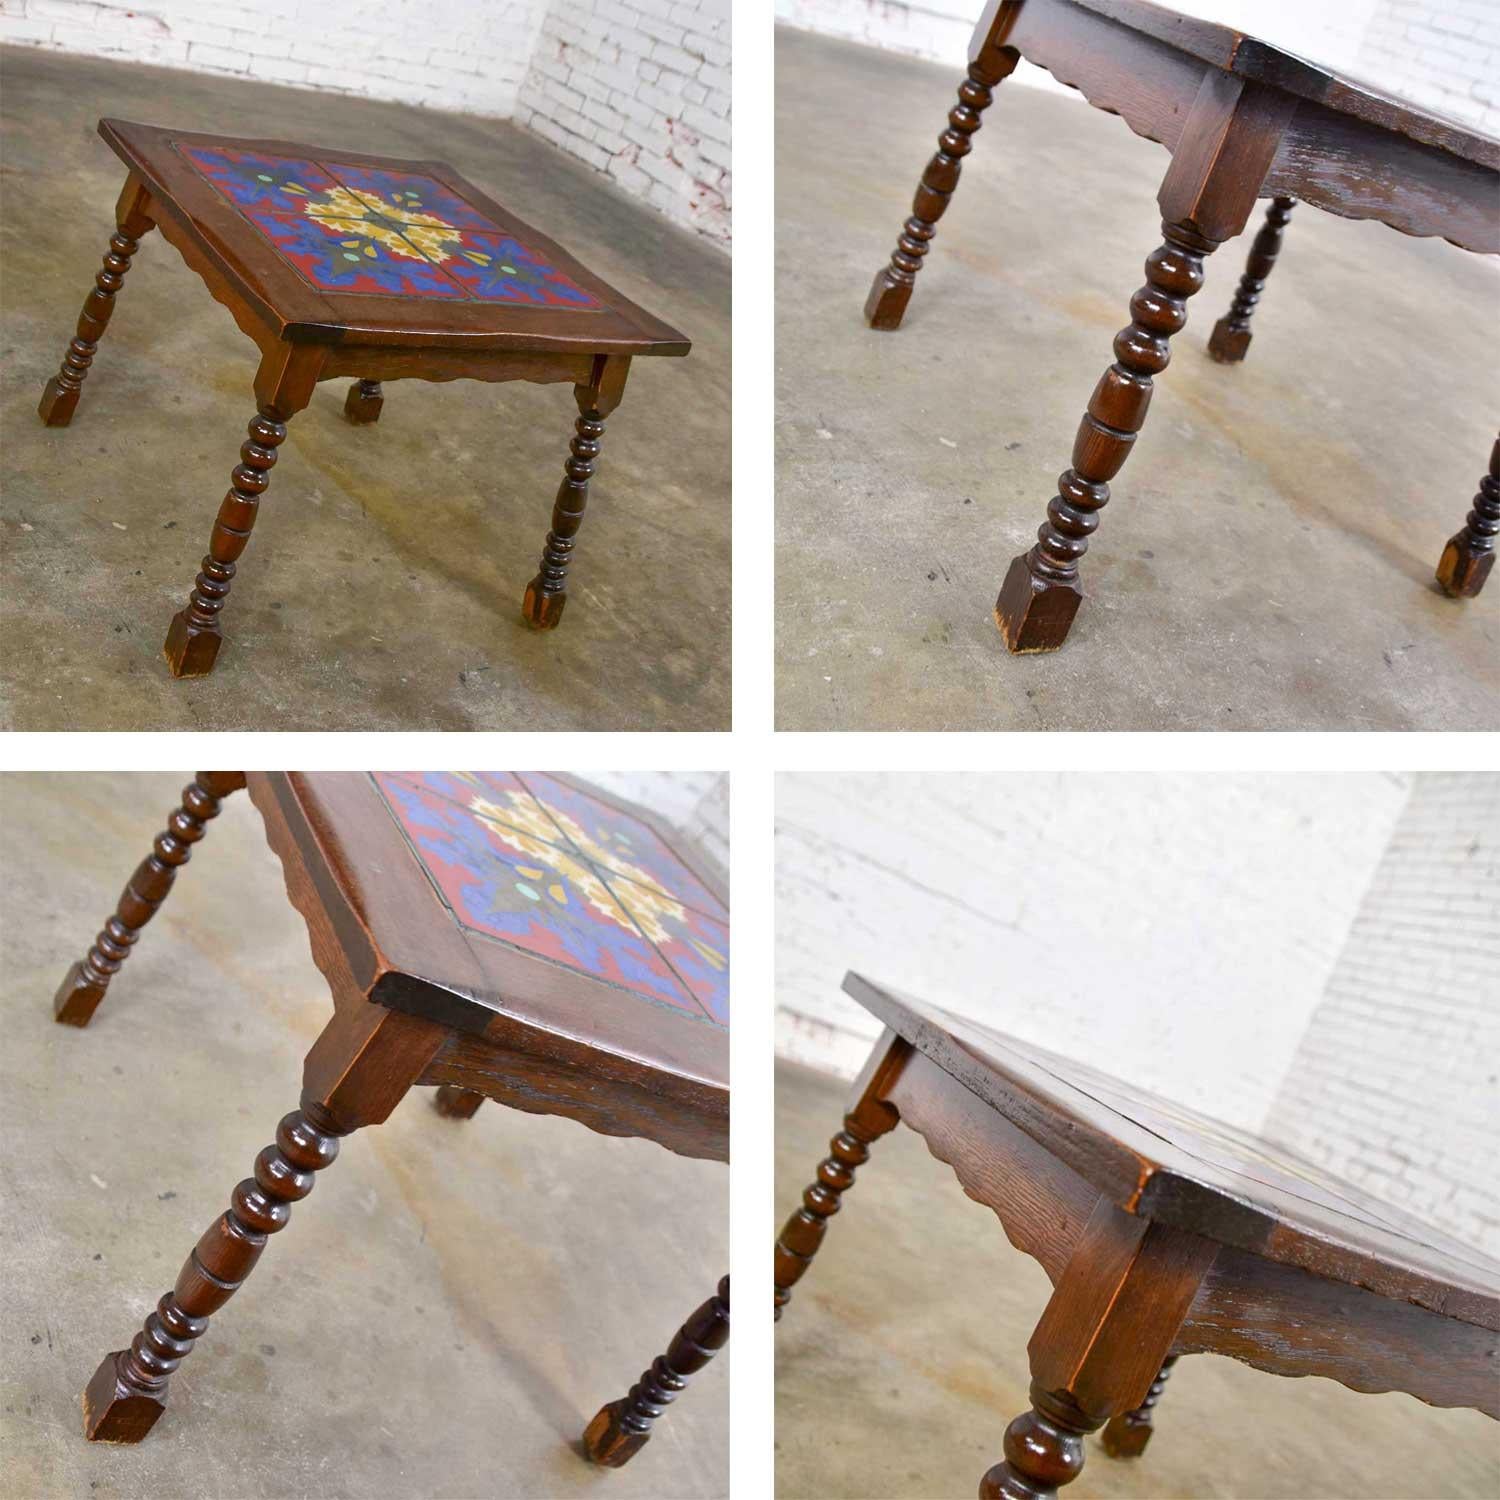 Table d'appoint Catalina California ou Mission Arts & Craft Style Spanish Tile Top en vente 6